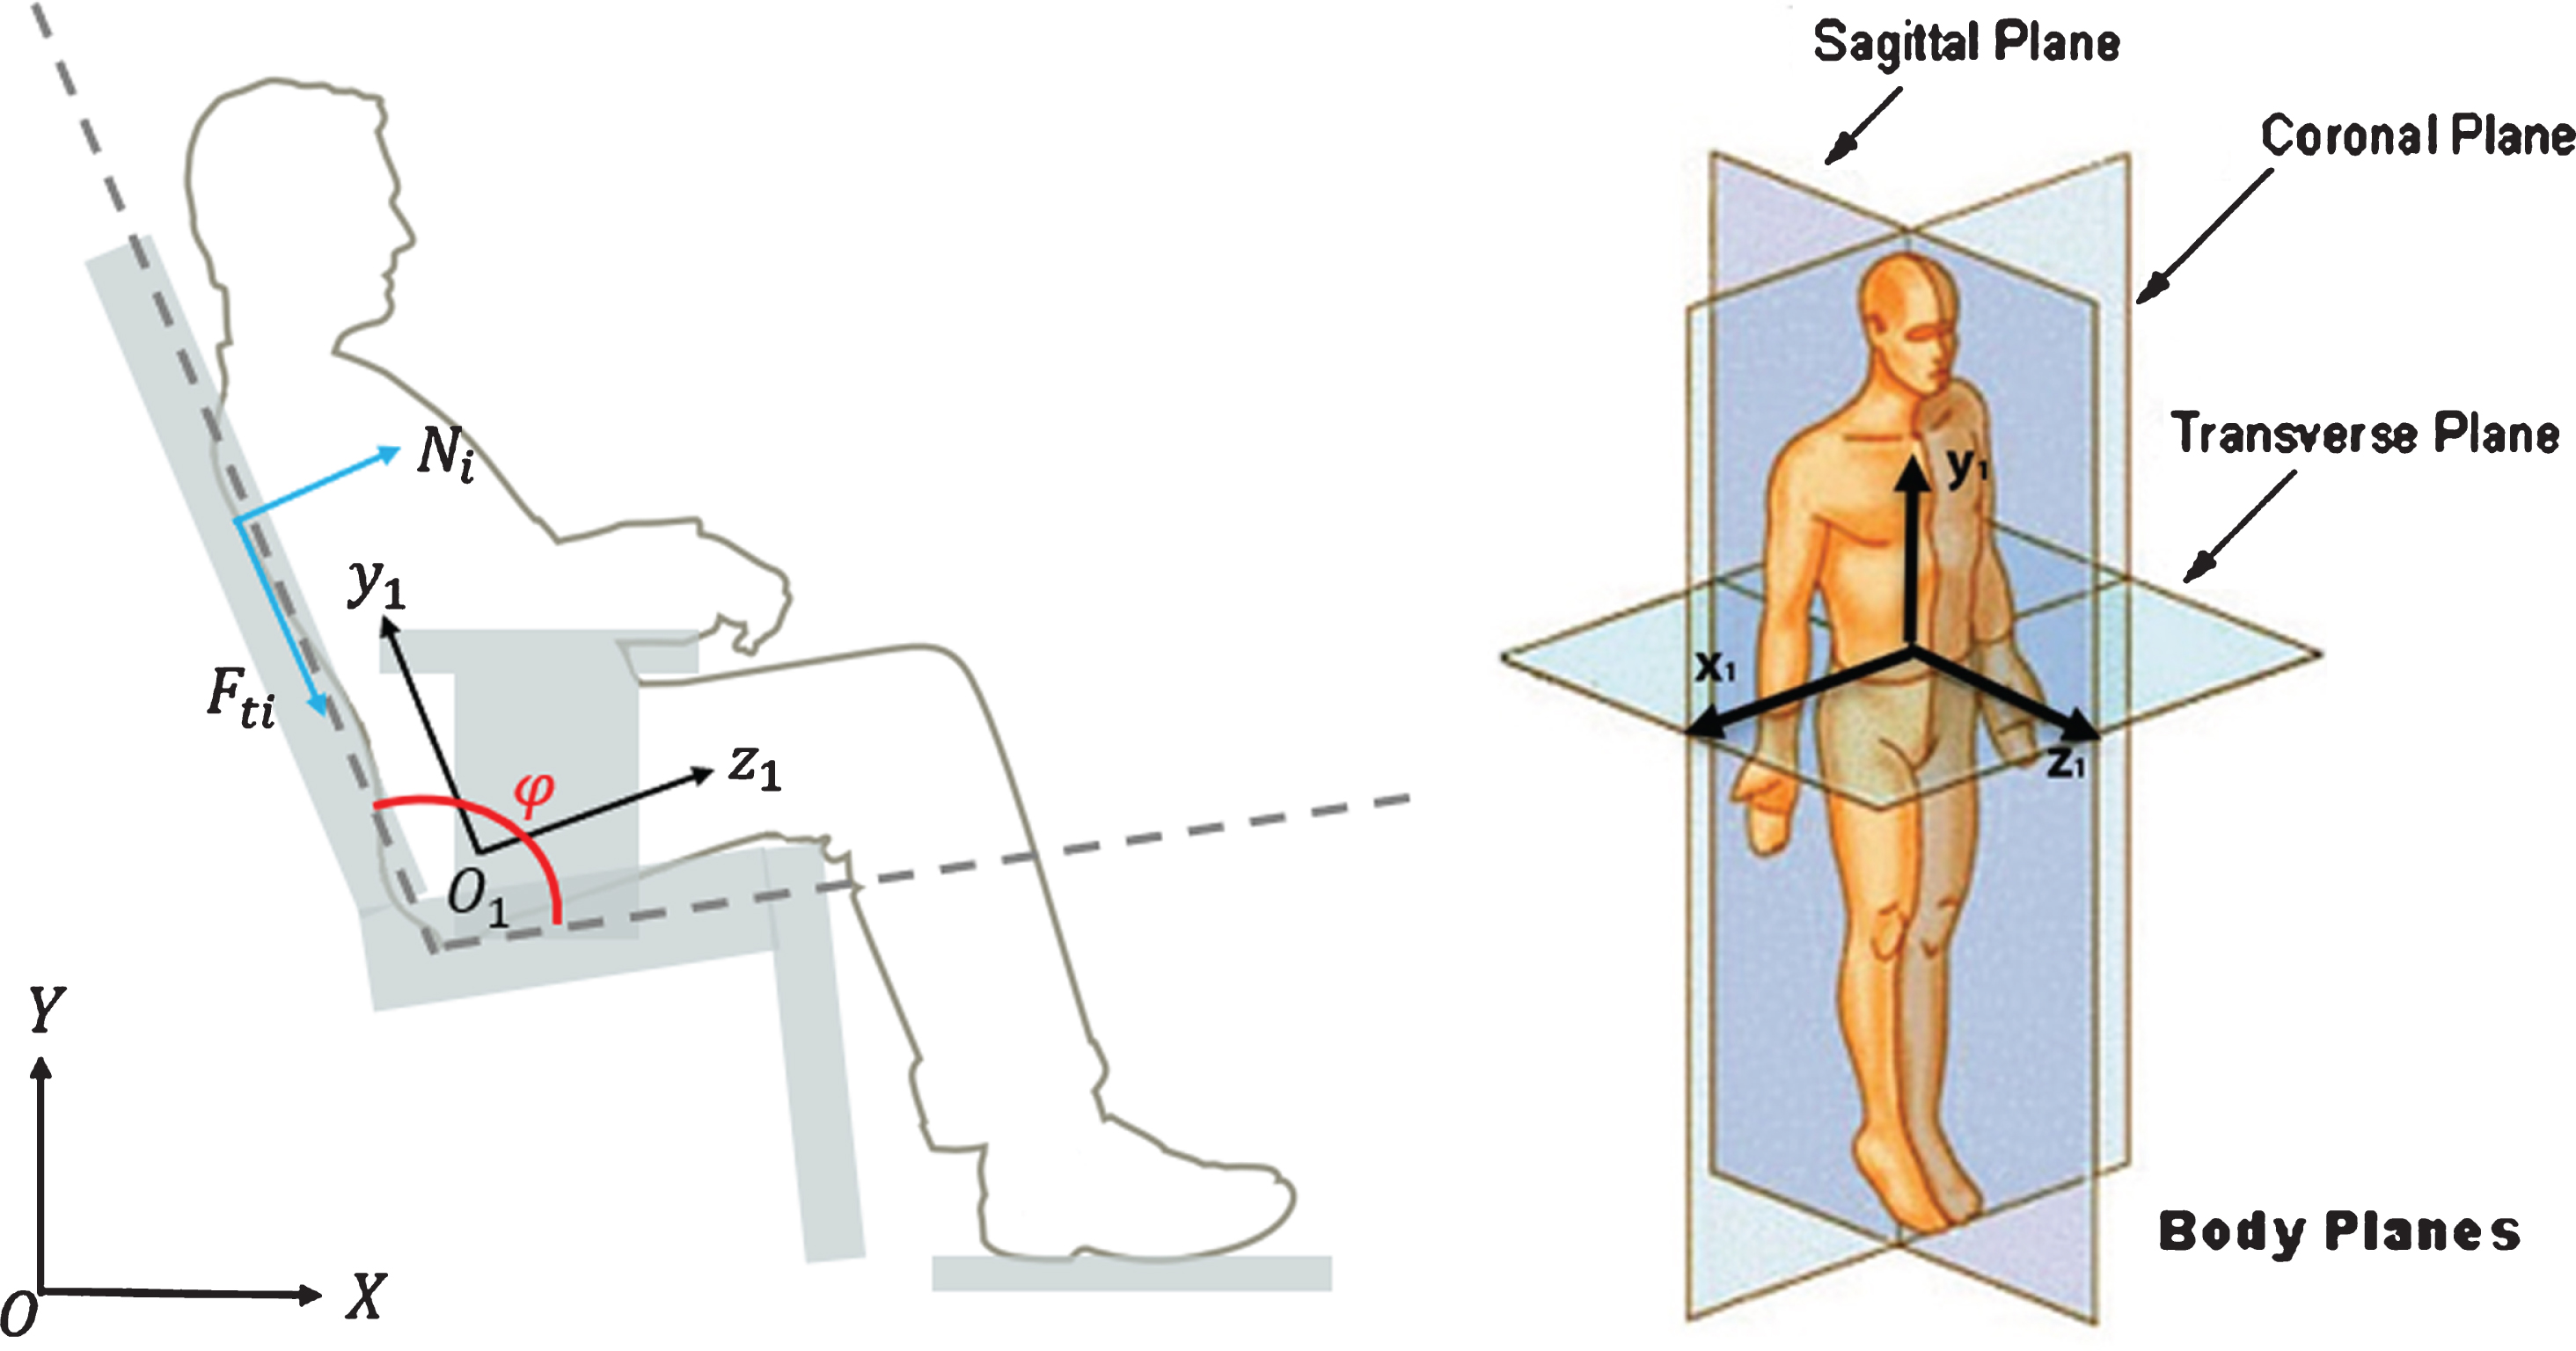 Analysis and modeling of human seat interaction with a focus on